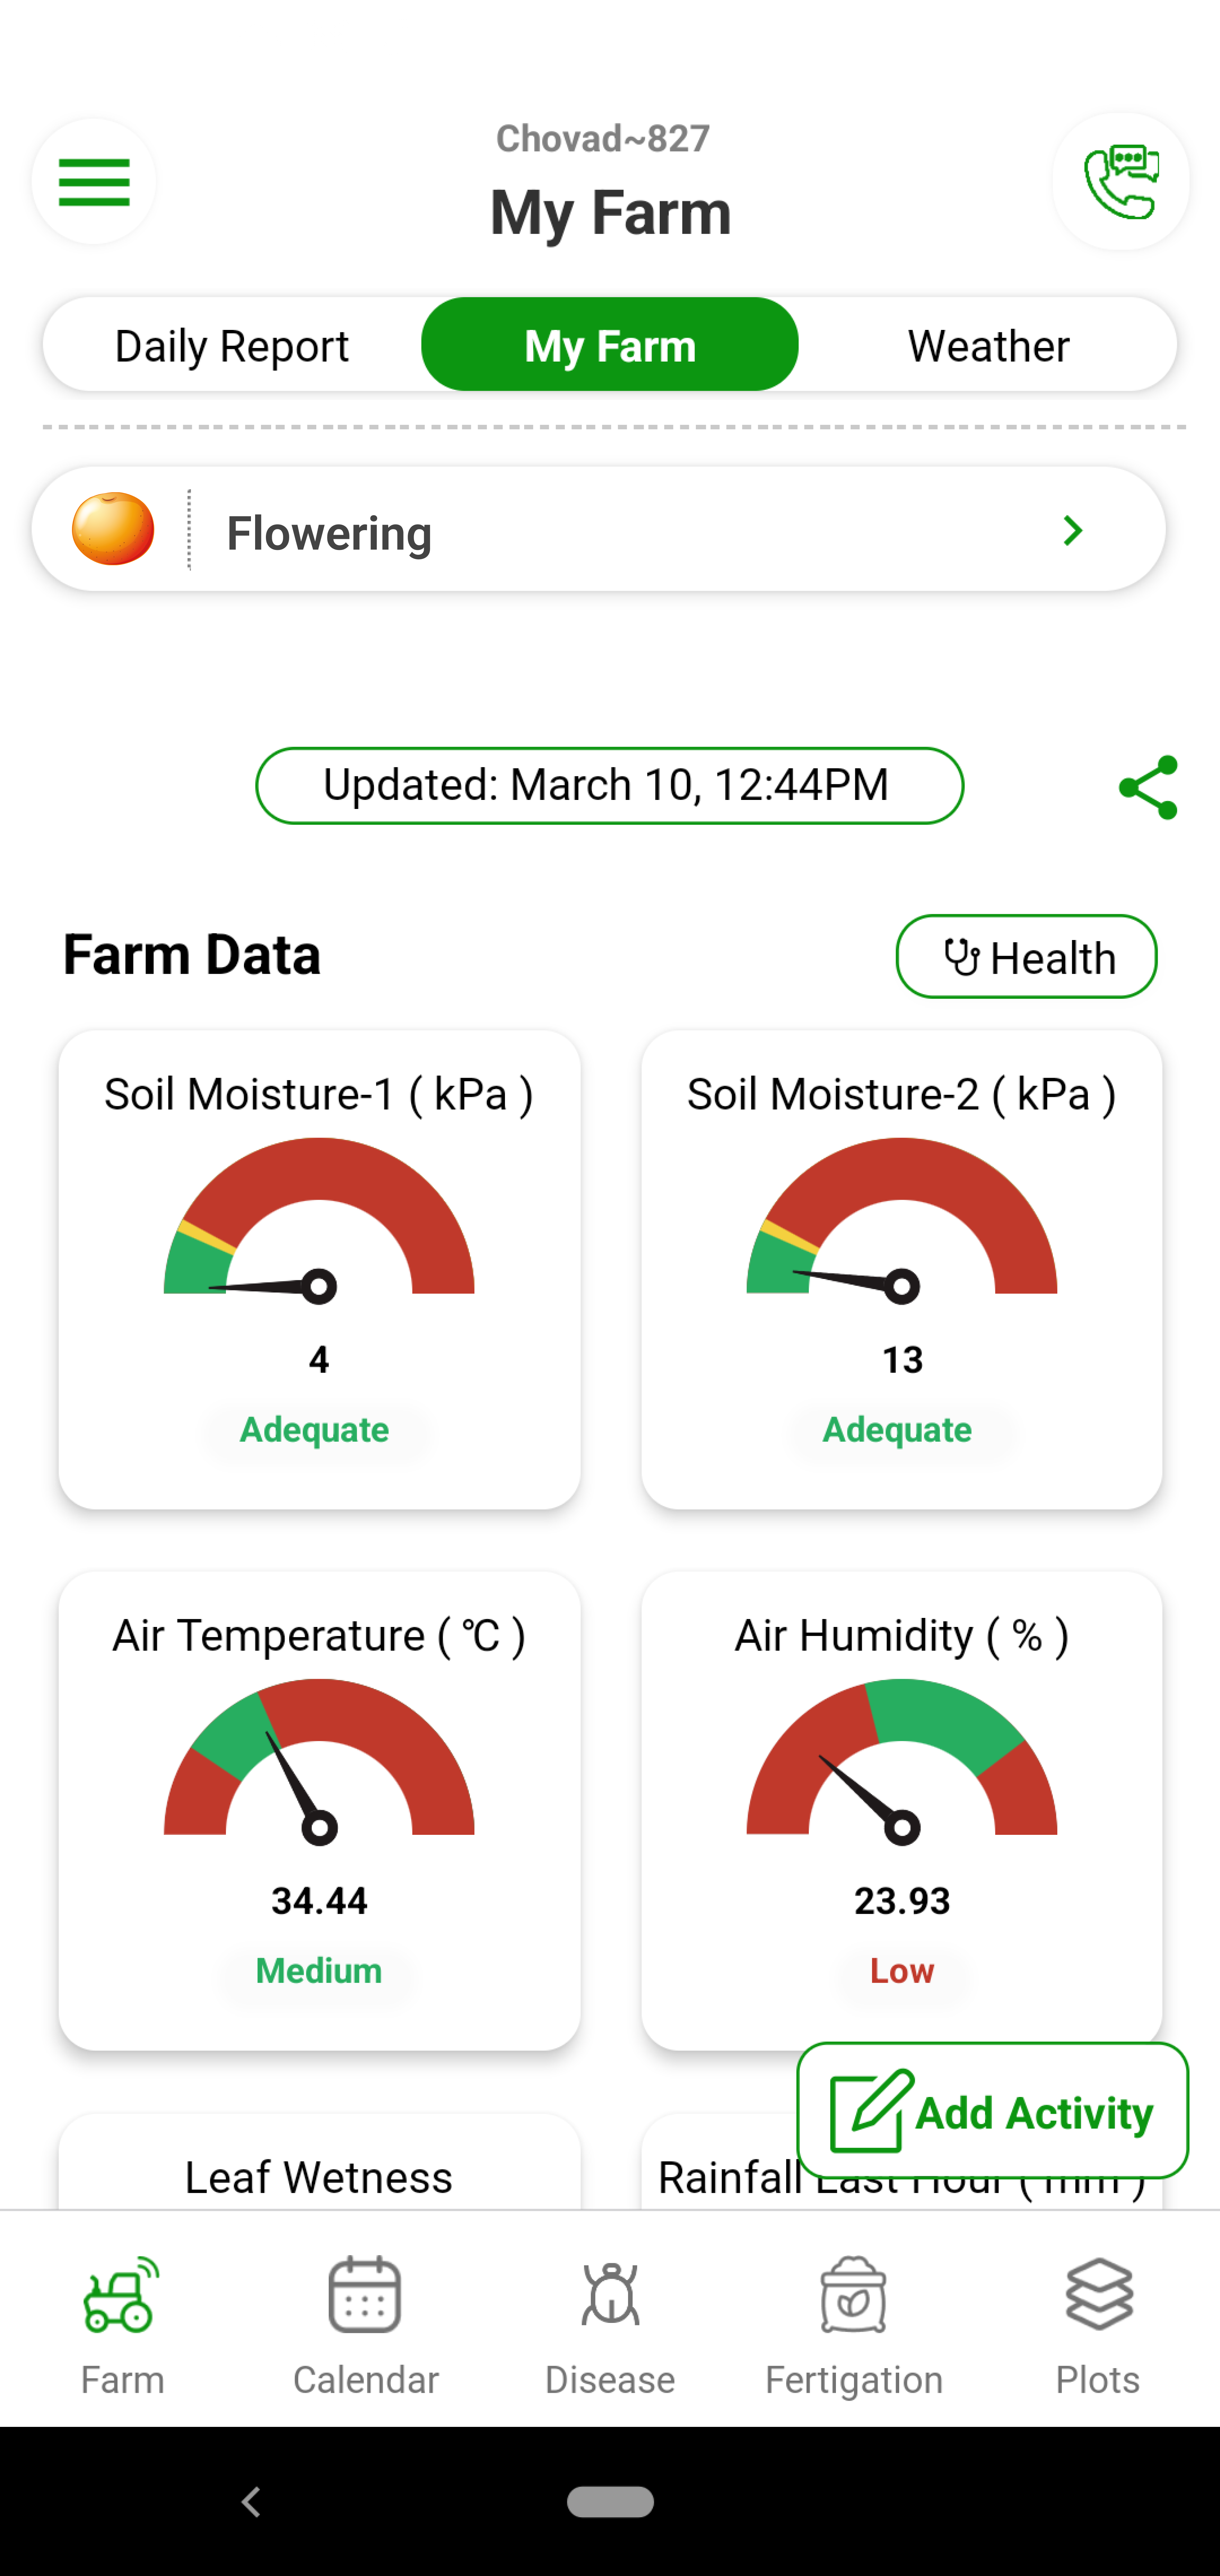 Fyllo device installed at your orchard monitors your farm 24*7 and captures 12 critical parameters in real time. You get this data on you mobile and dashboard in real time. You get to monitor where the crop is getting enough sunlight, proper temperature or humidity.